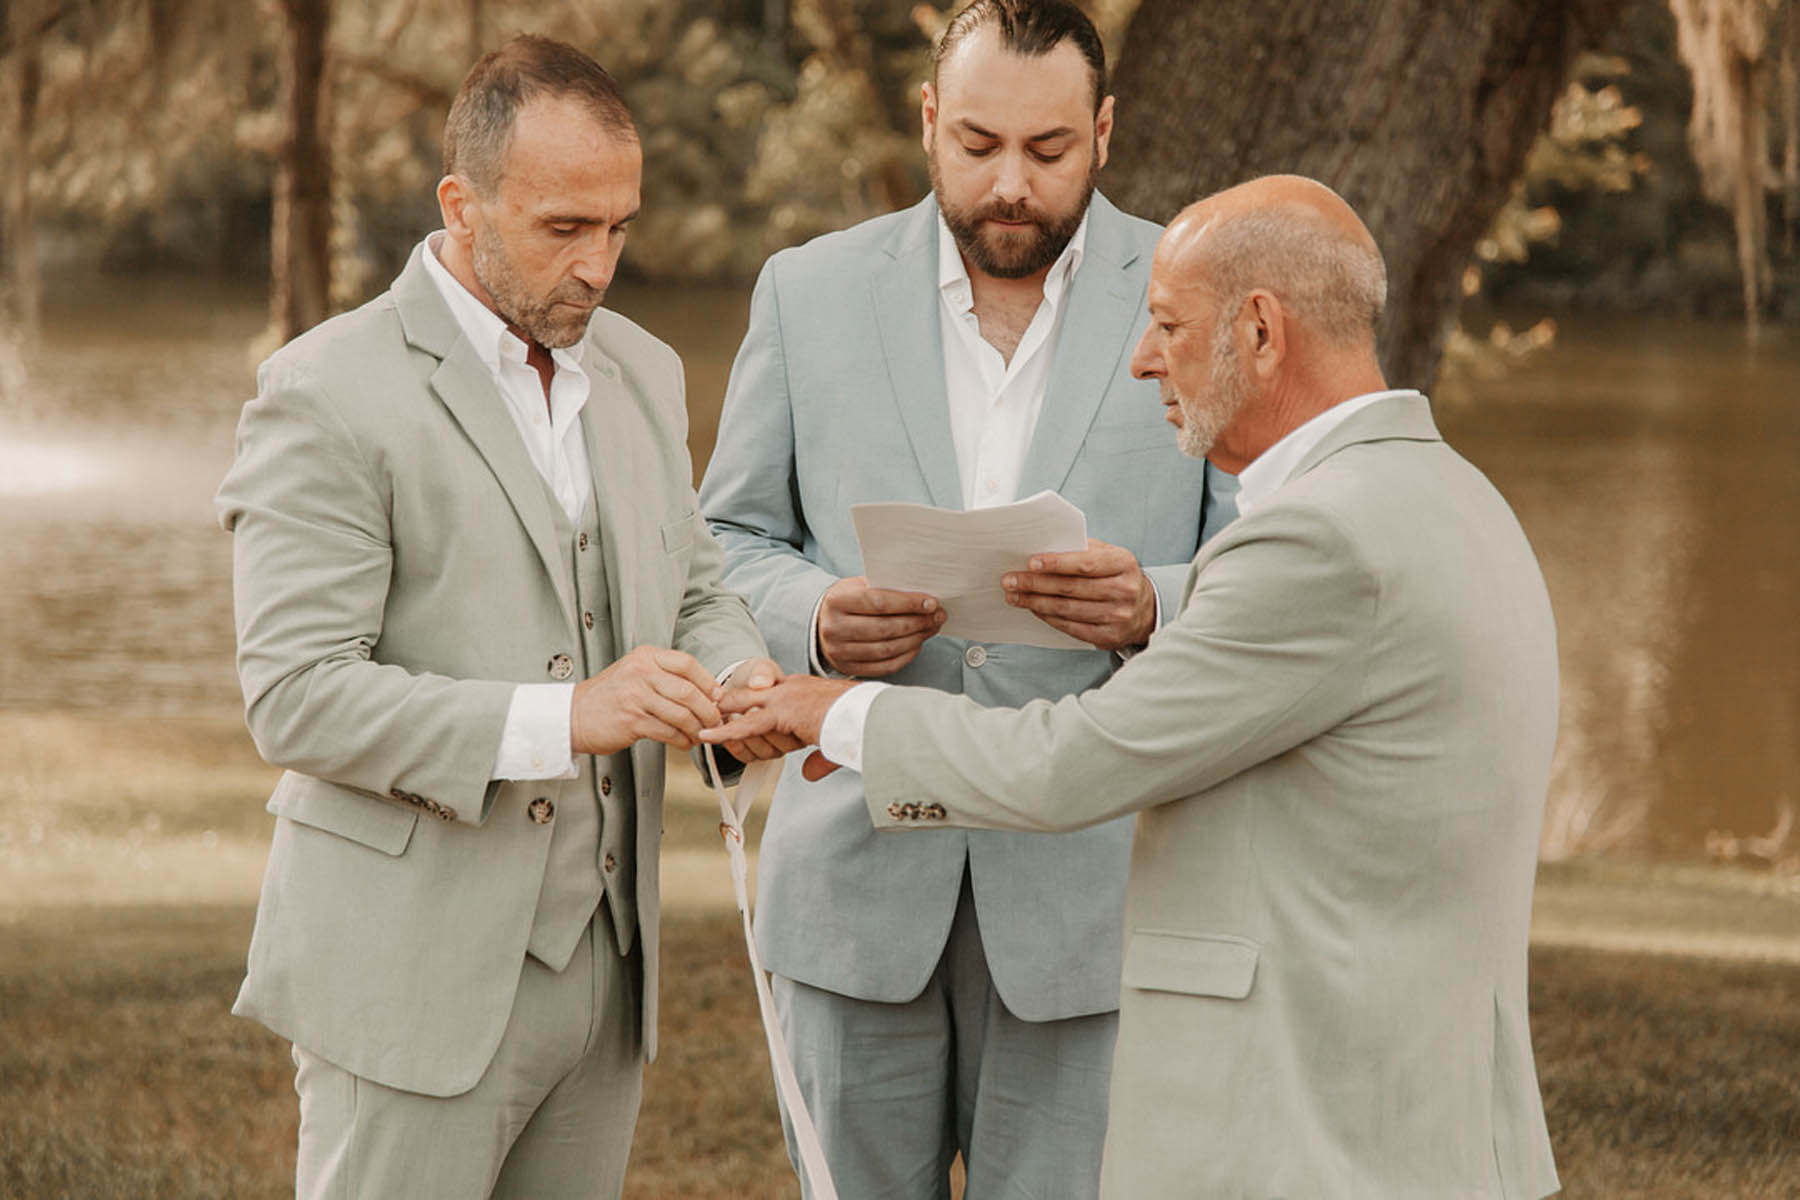 Two grooms in sage gray suits and exchange rings in front of their officiant, a person in a blue suit.